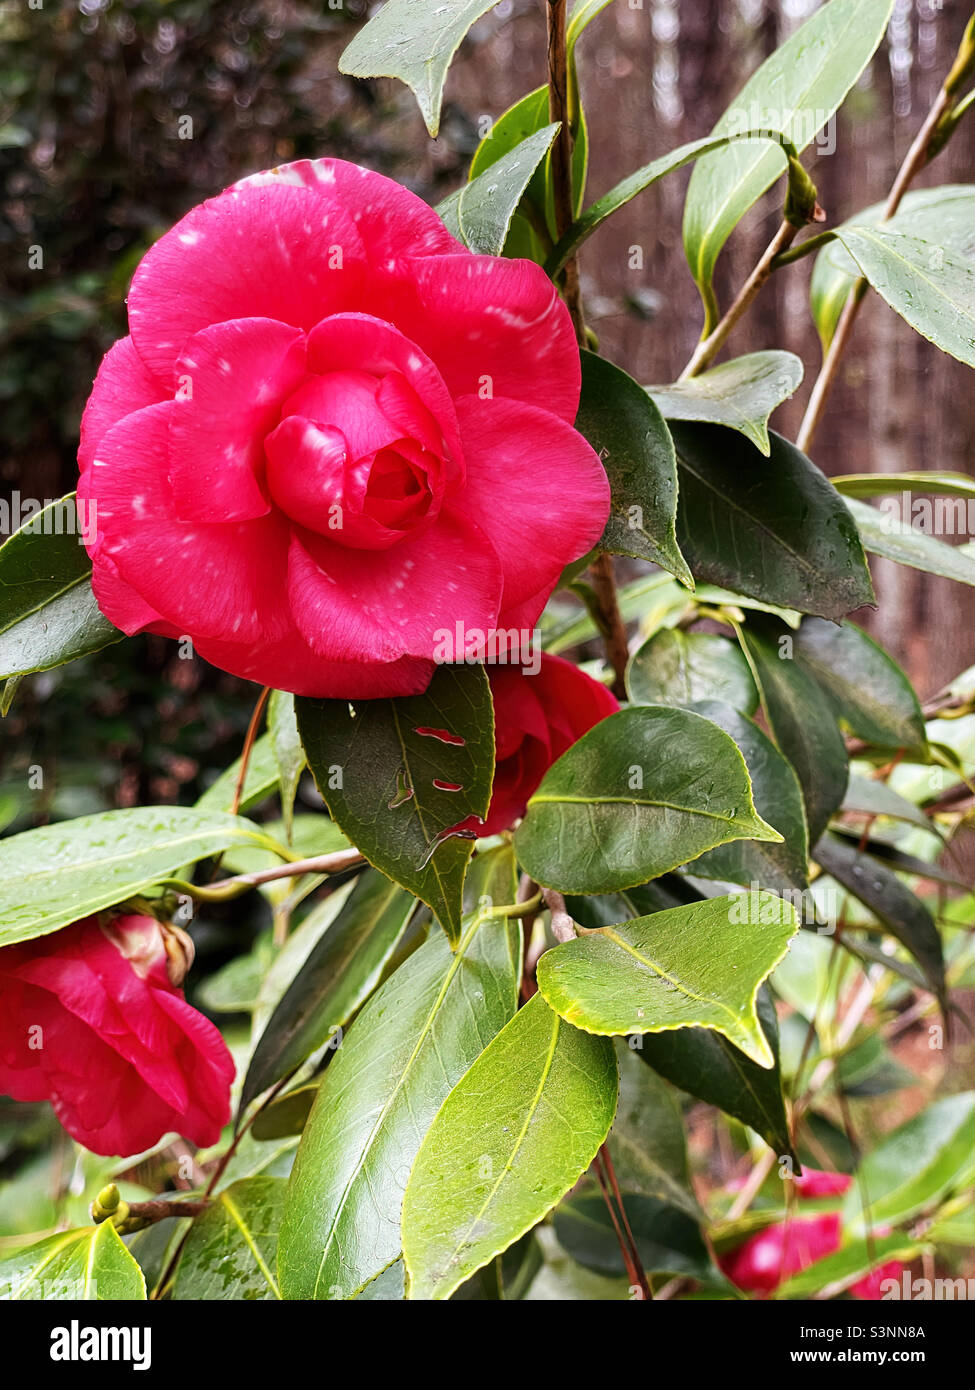 Bart Colbert camellia flower blossom. Strong pink color with splotches of white. Stock Photo